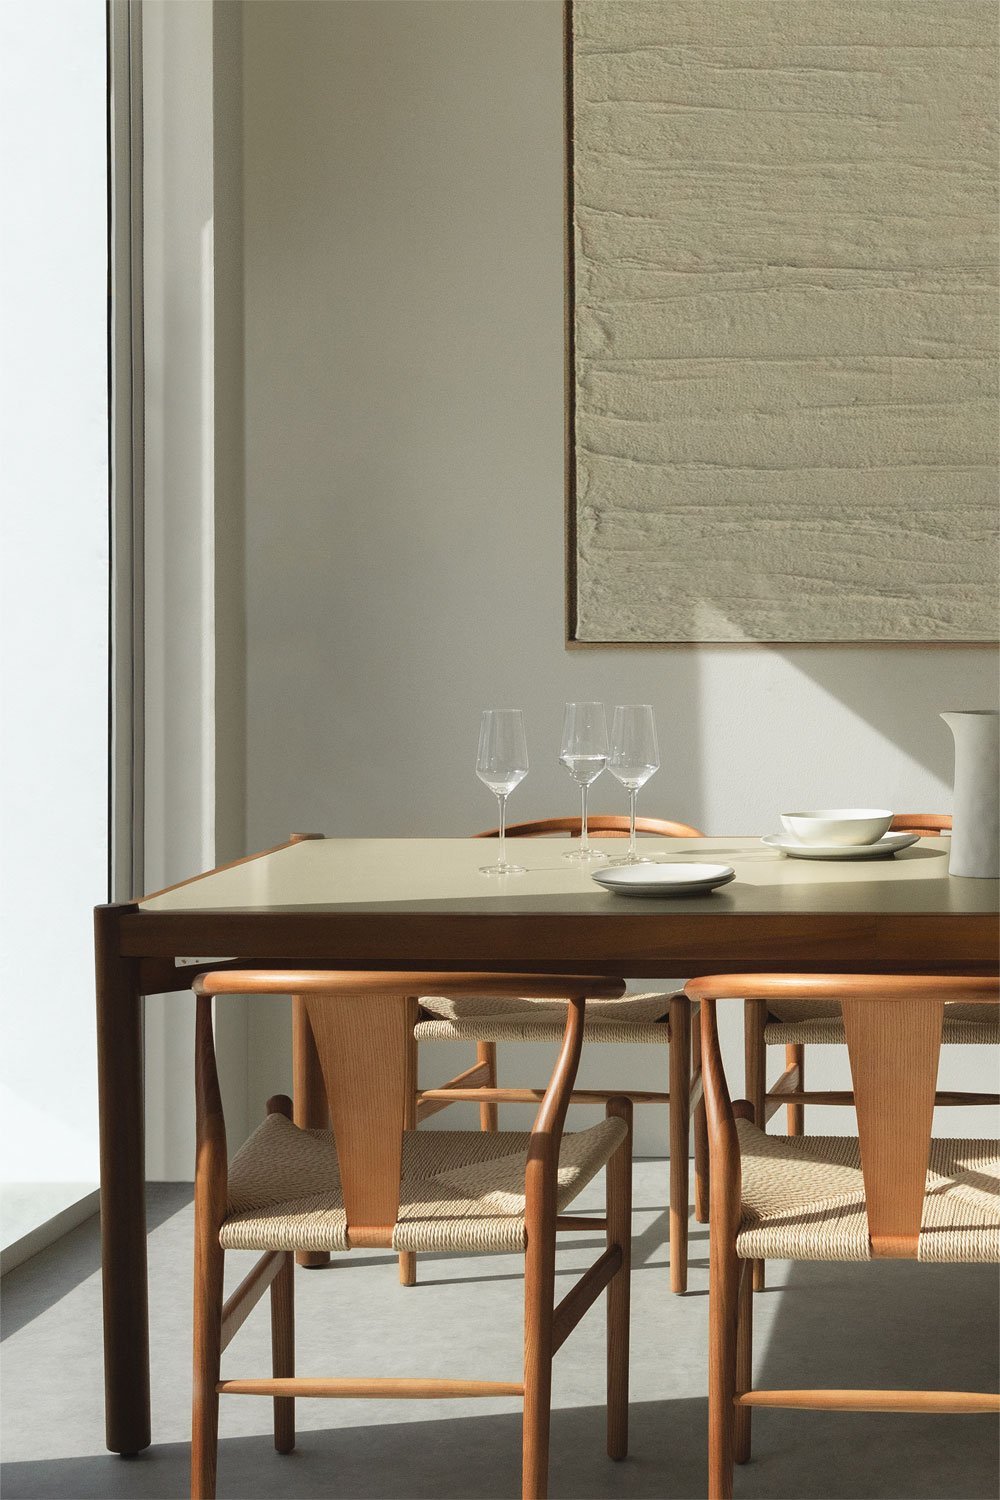 Gamila Rectangular Table Set (210x100 cm) and 6 Dining Chairs in Wood and Cement Uish Edition, gallery image 1